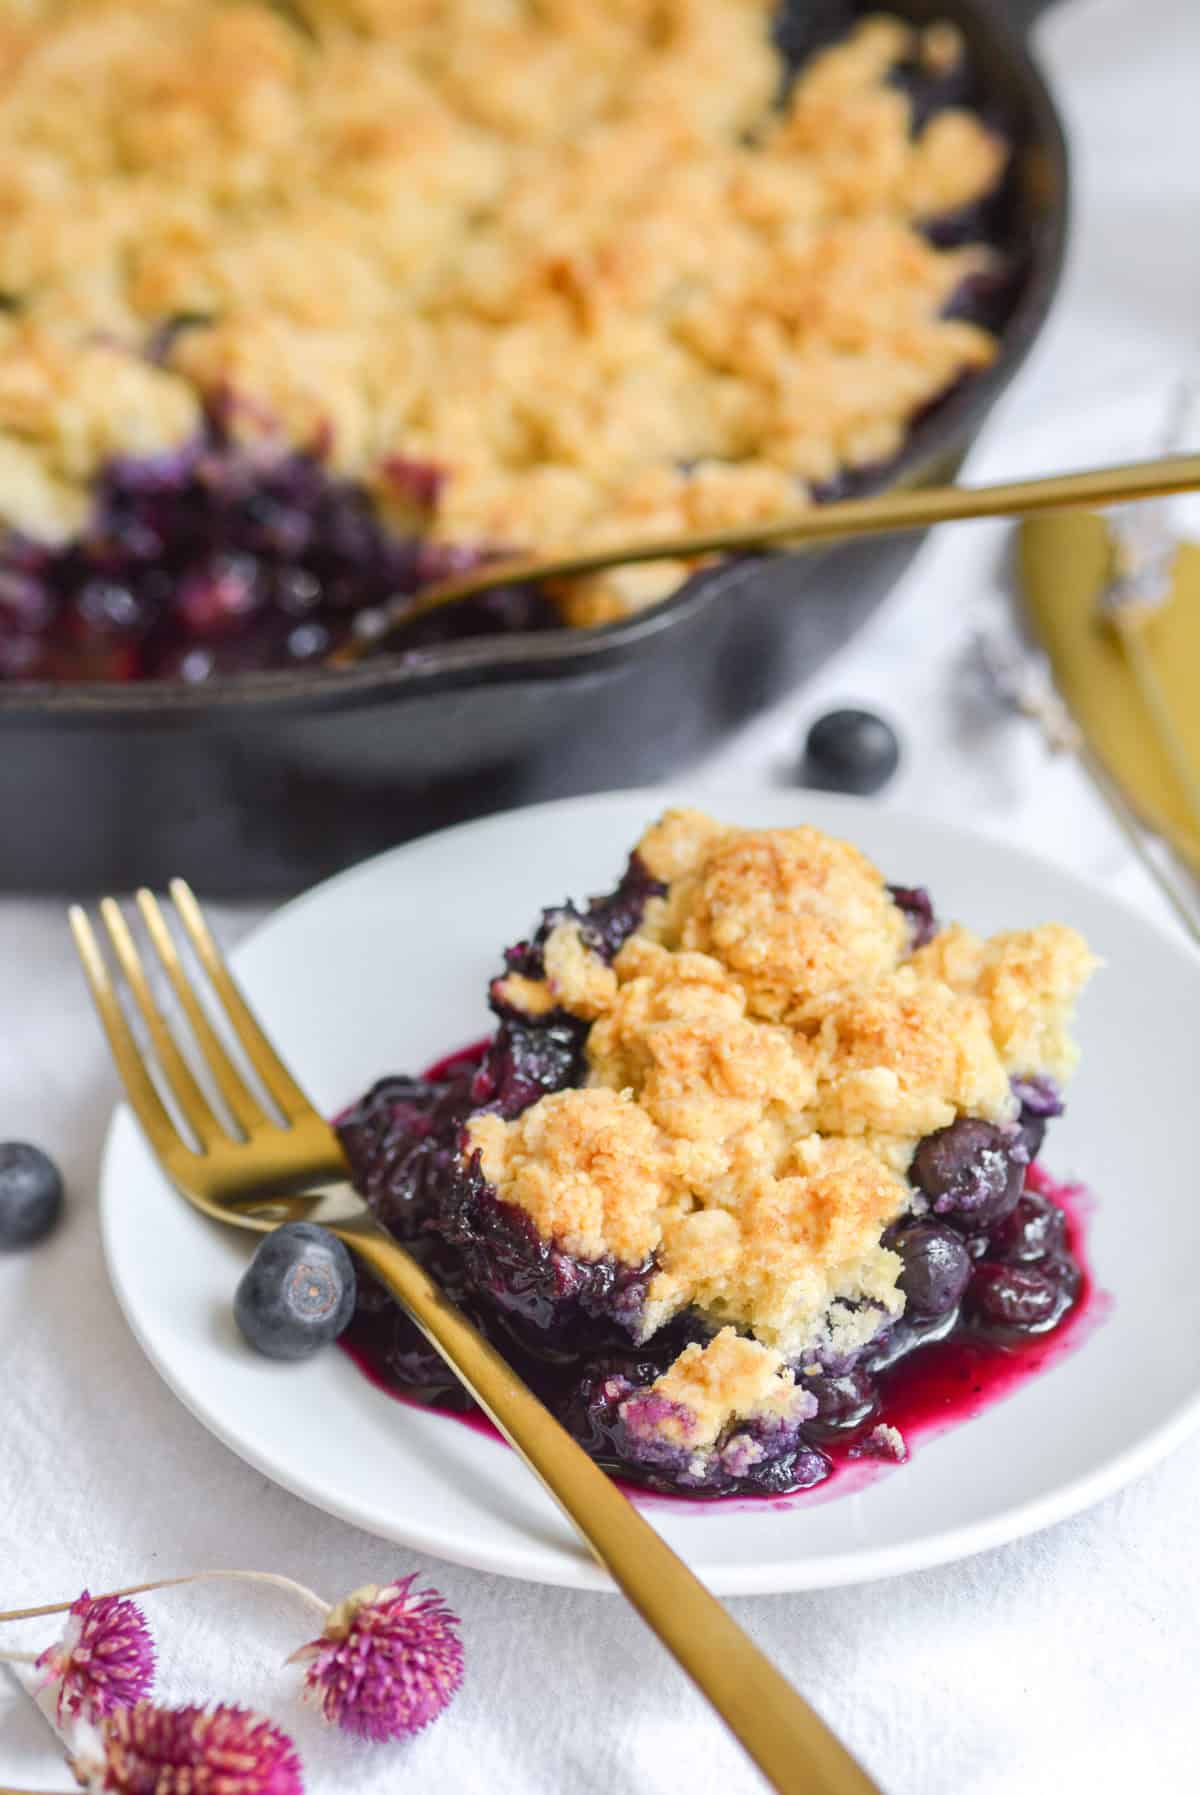 Vegan Blueberry Cobber on a small plate with the remaining cobbler in a skillet in the background.